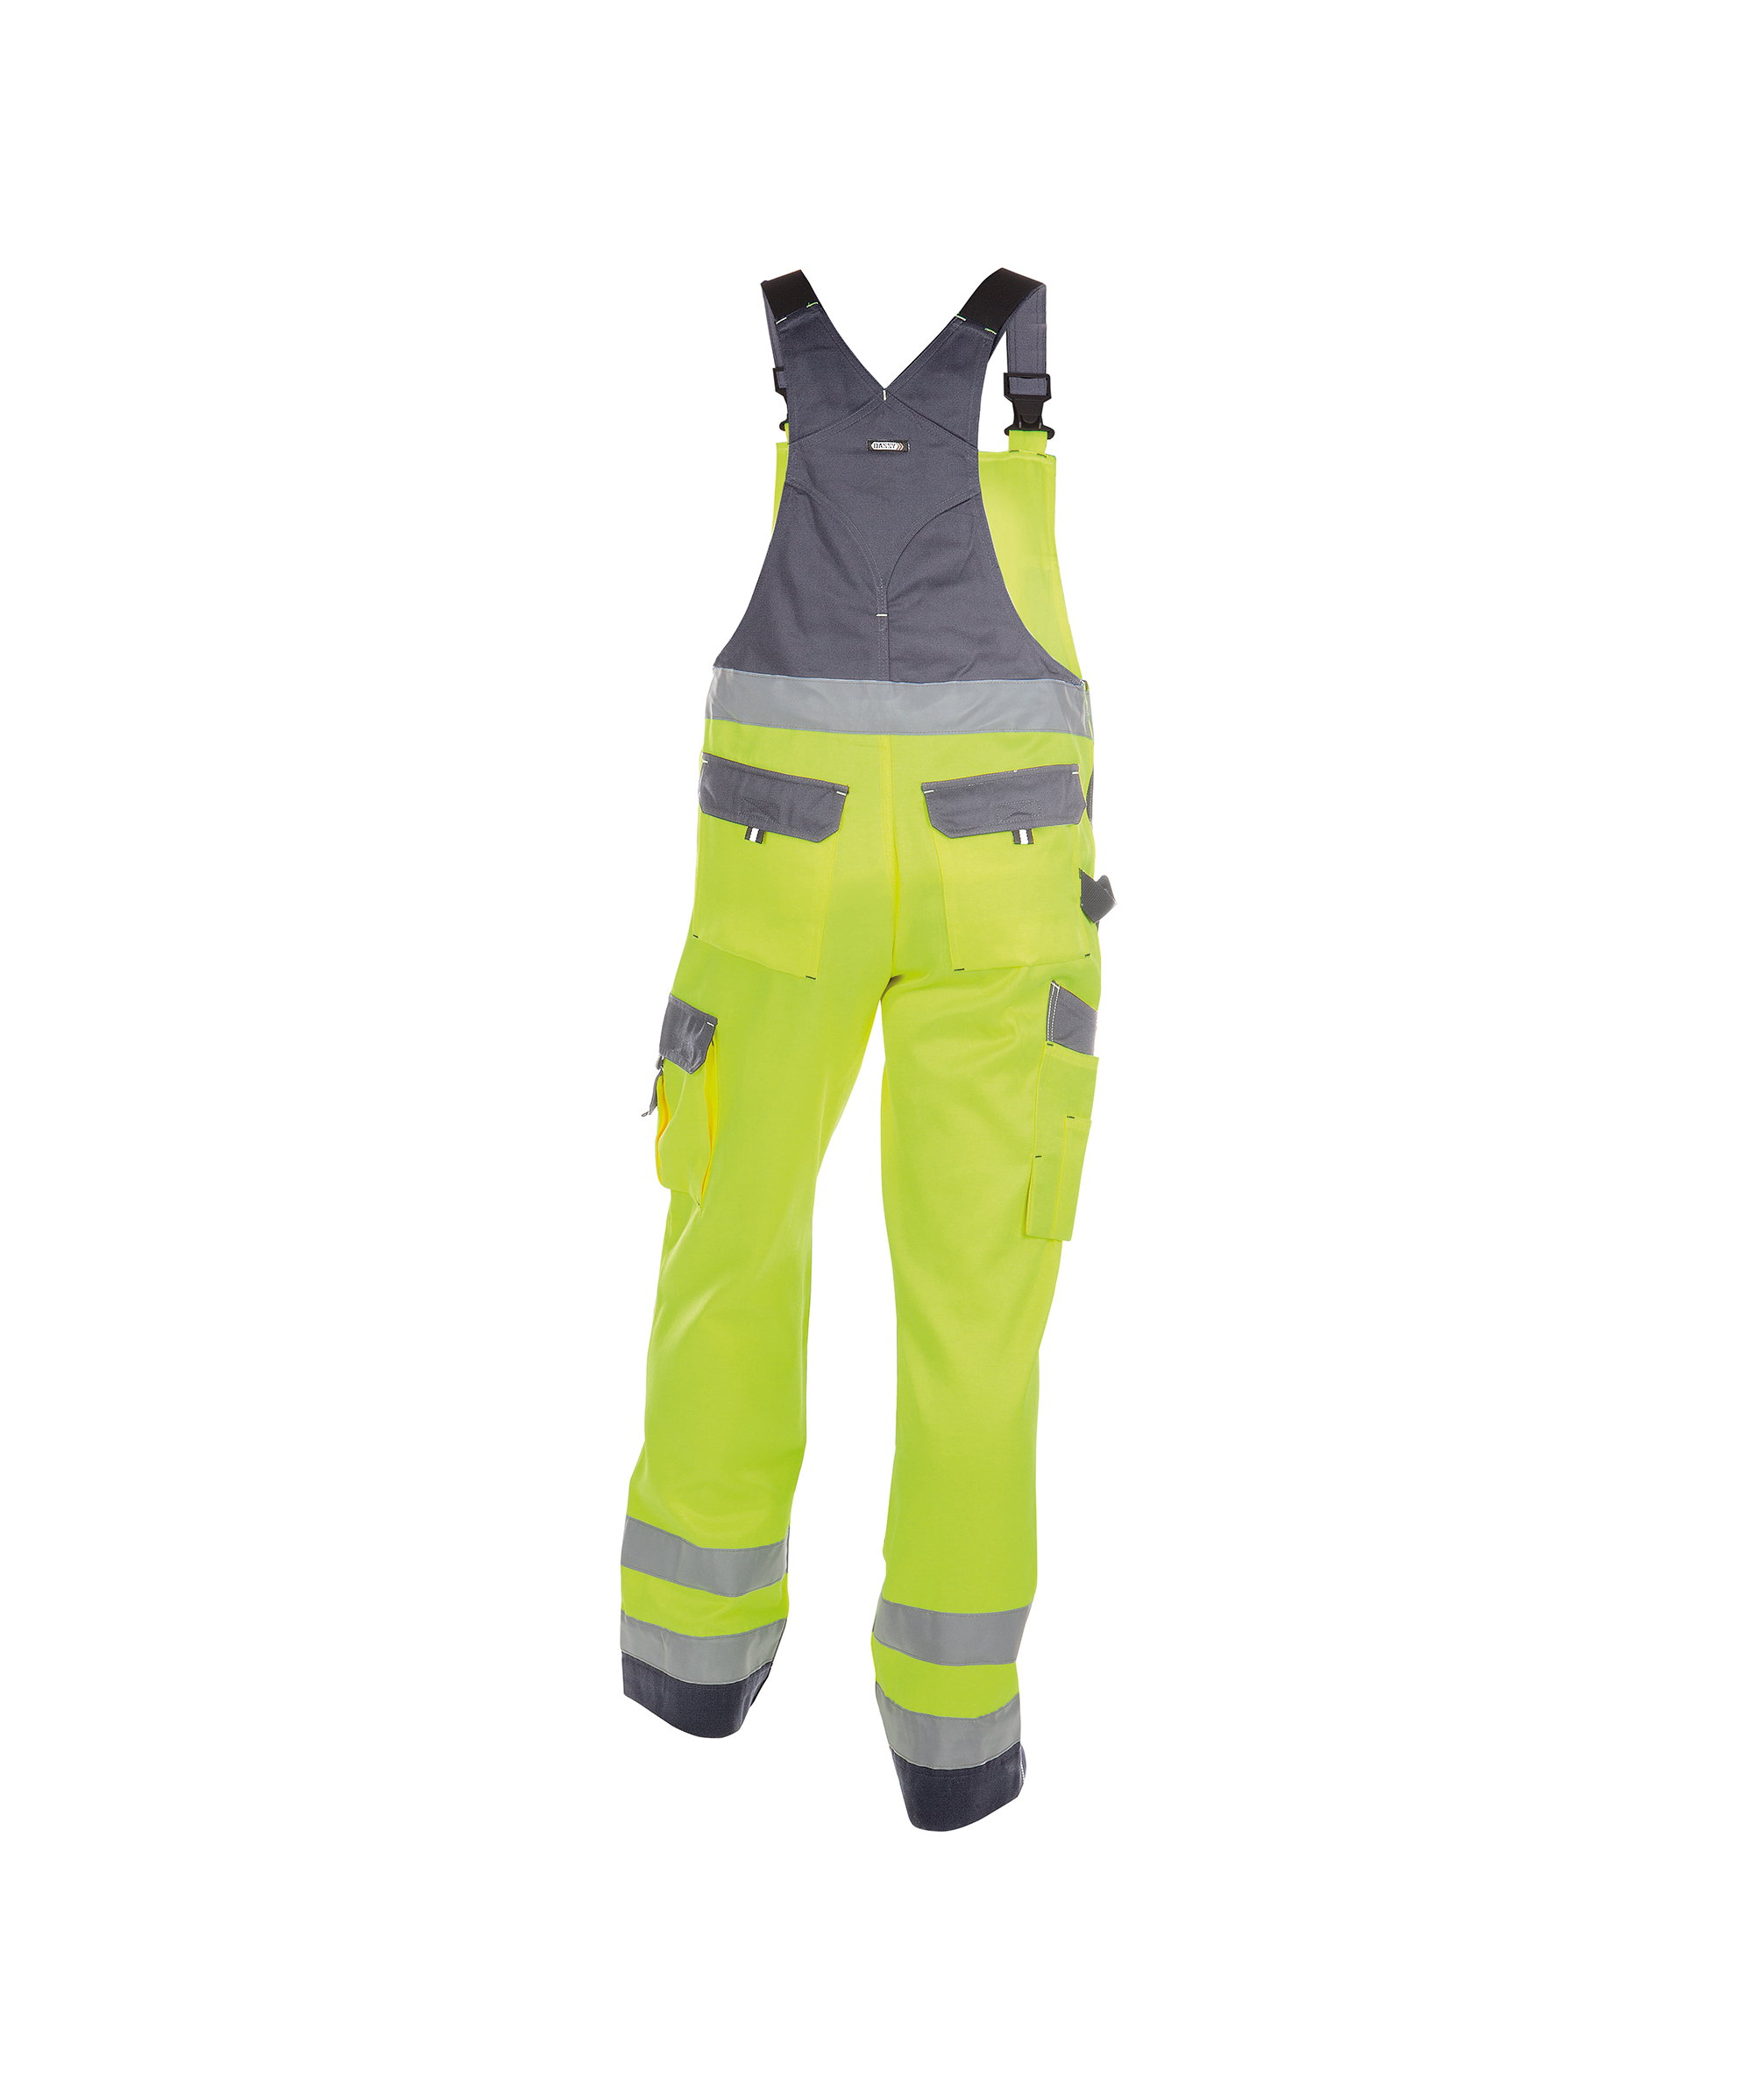 toulouse_high-visibility-brace-overall-with-knee-pockets_fluo-yellow-cement-grey_back.jpg